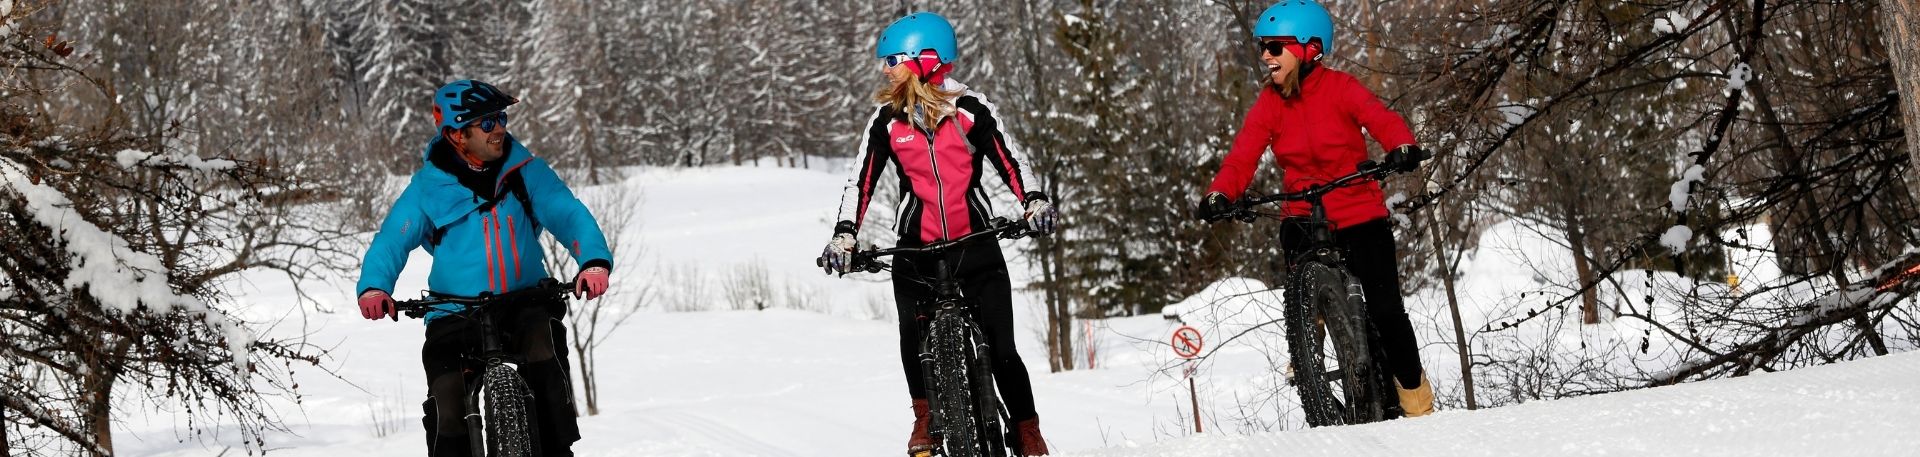 Fatbike NADS - ©T.Hytte.KlipProductions 